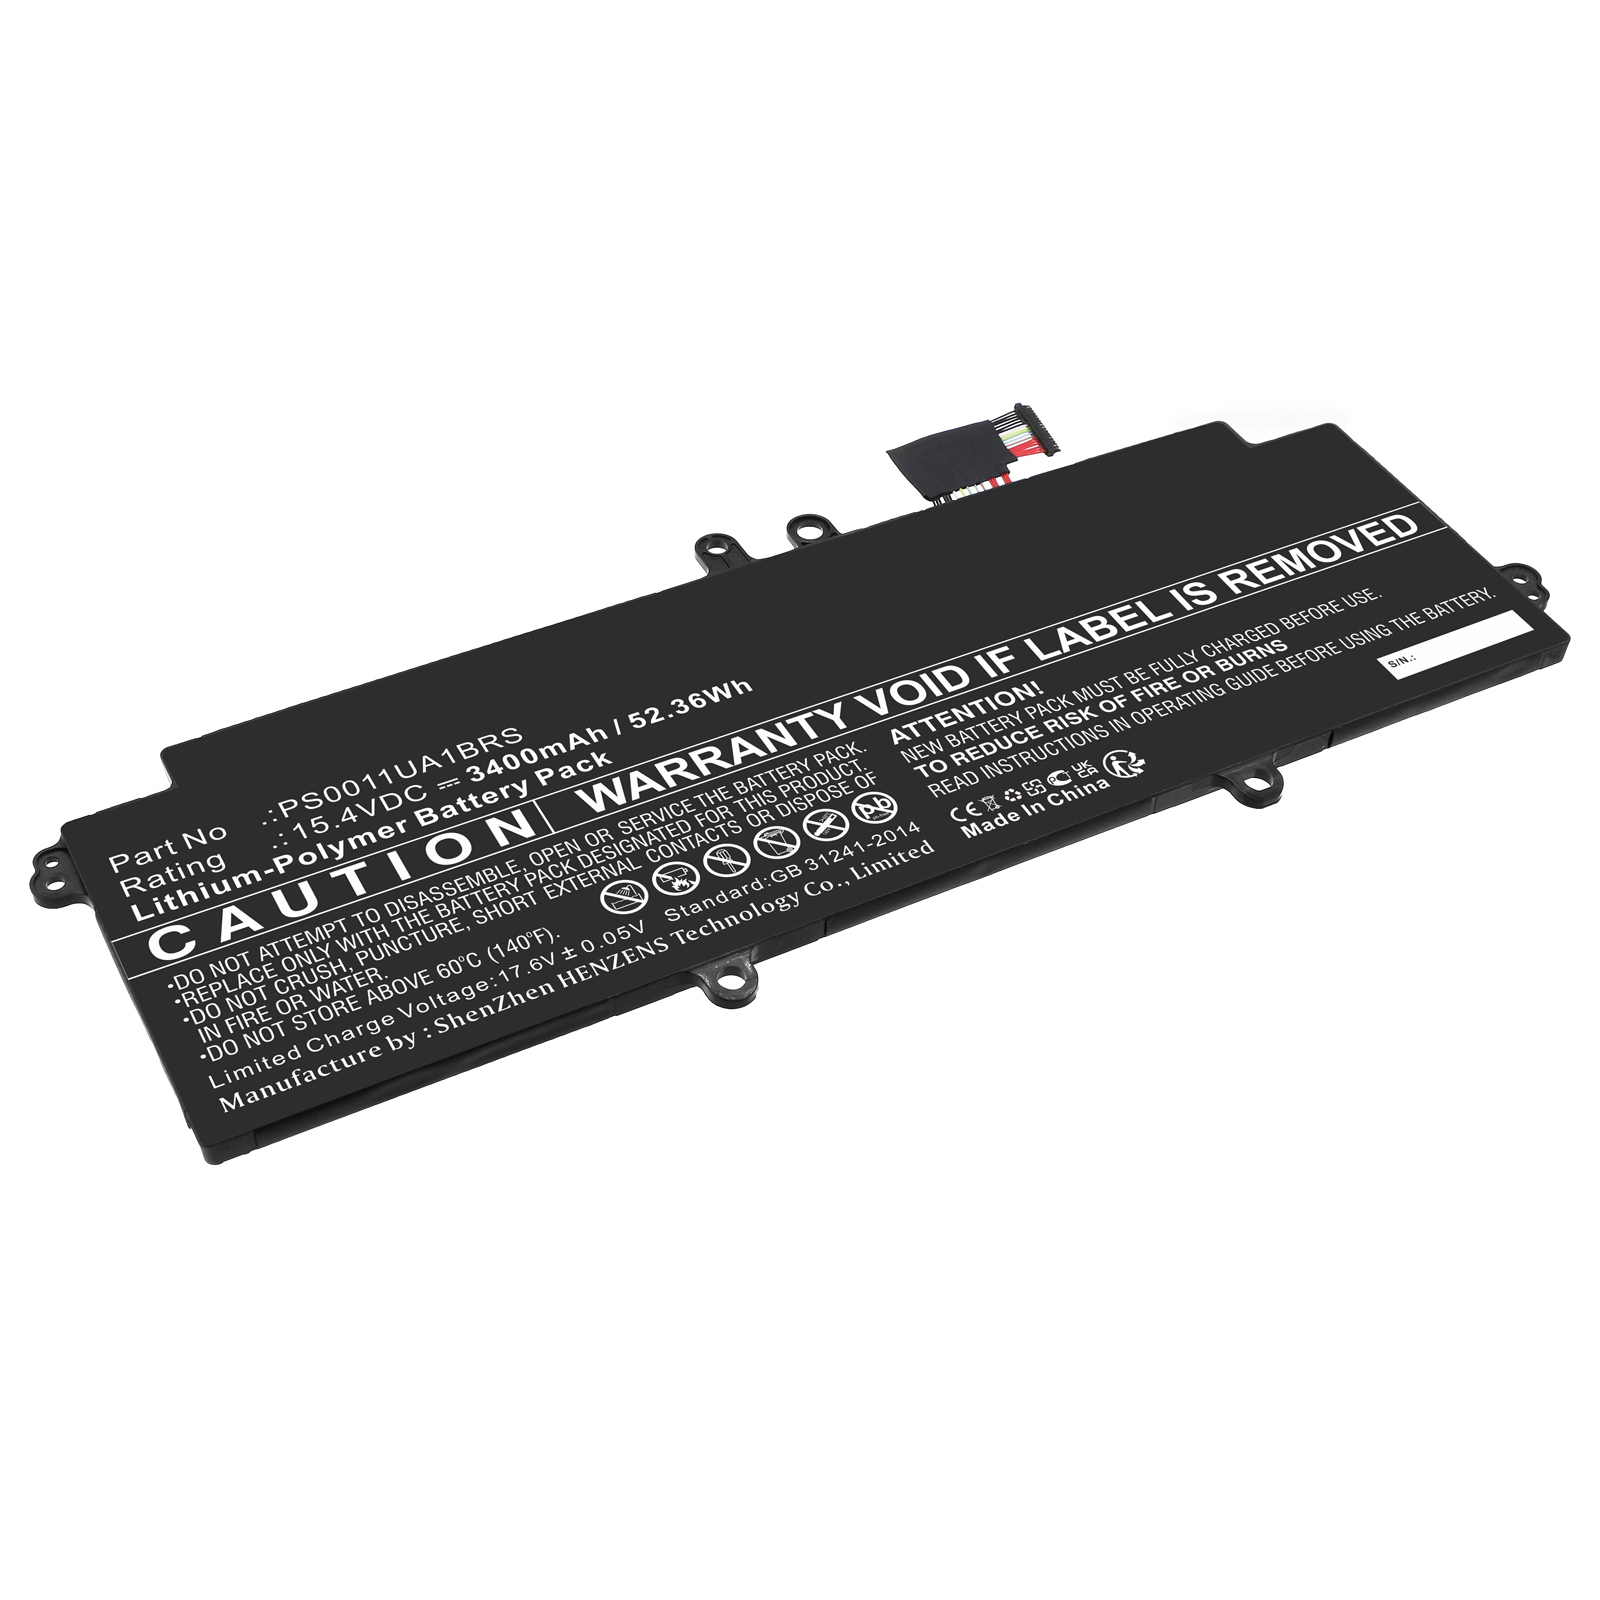 Batteries for DynabookLaptop